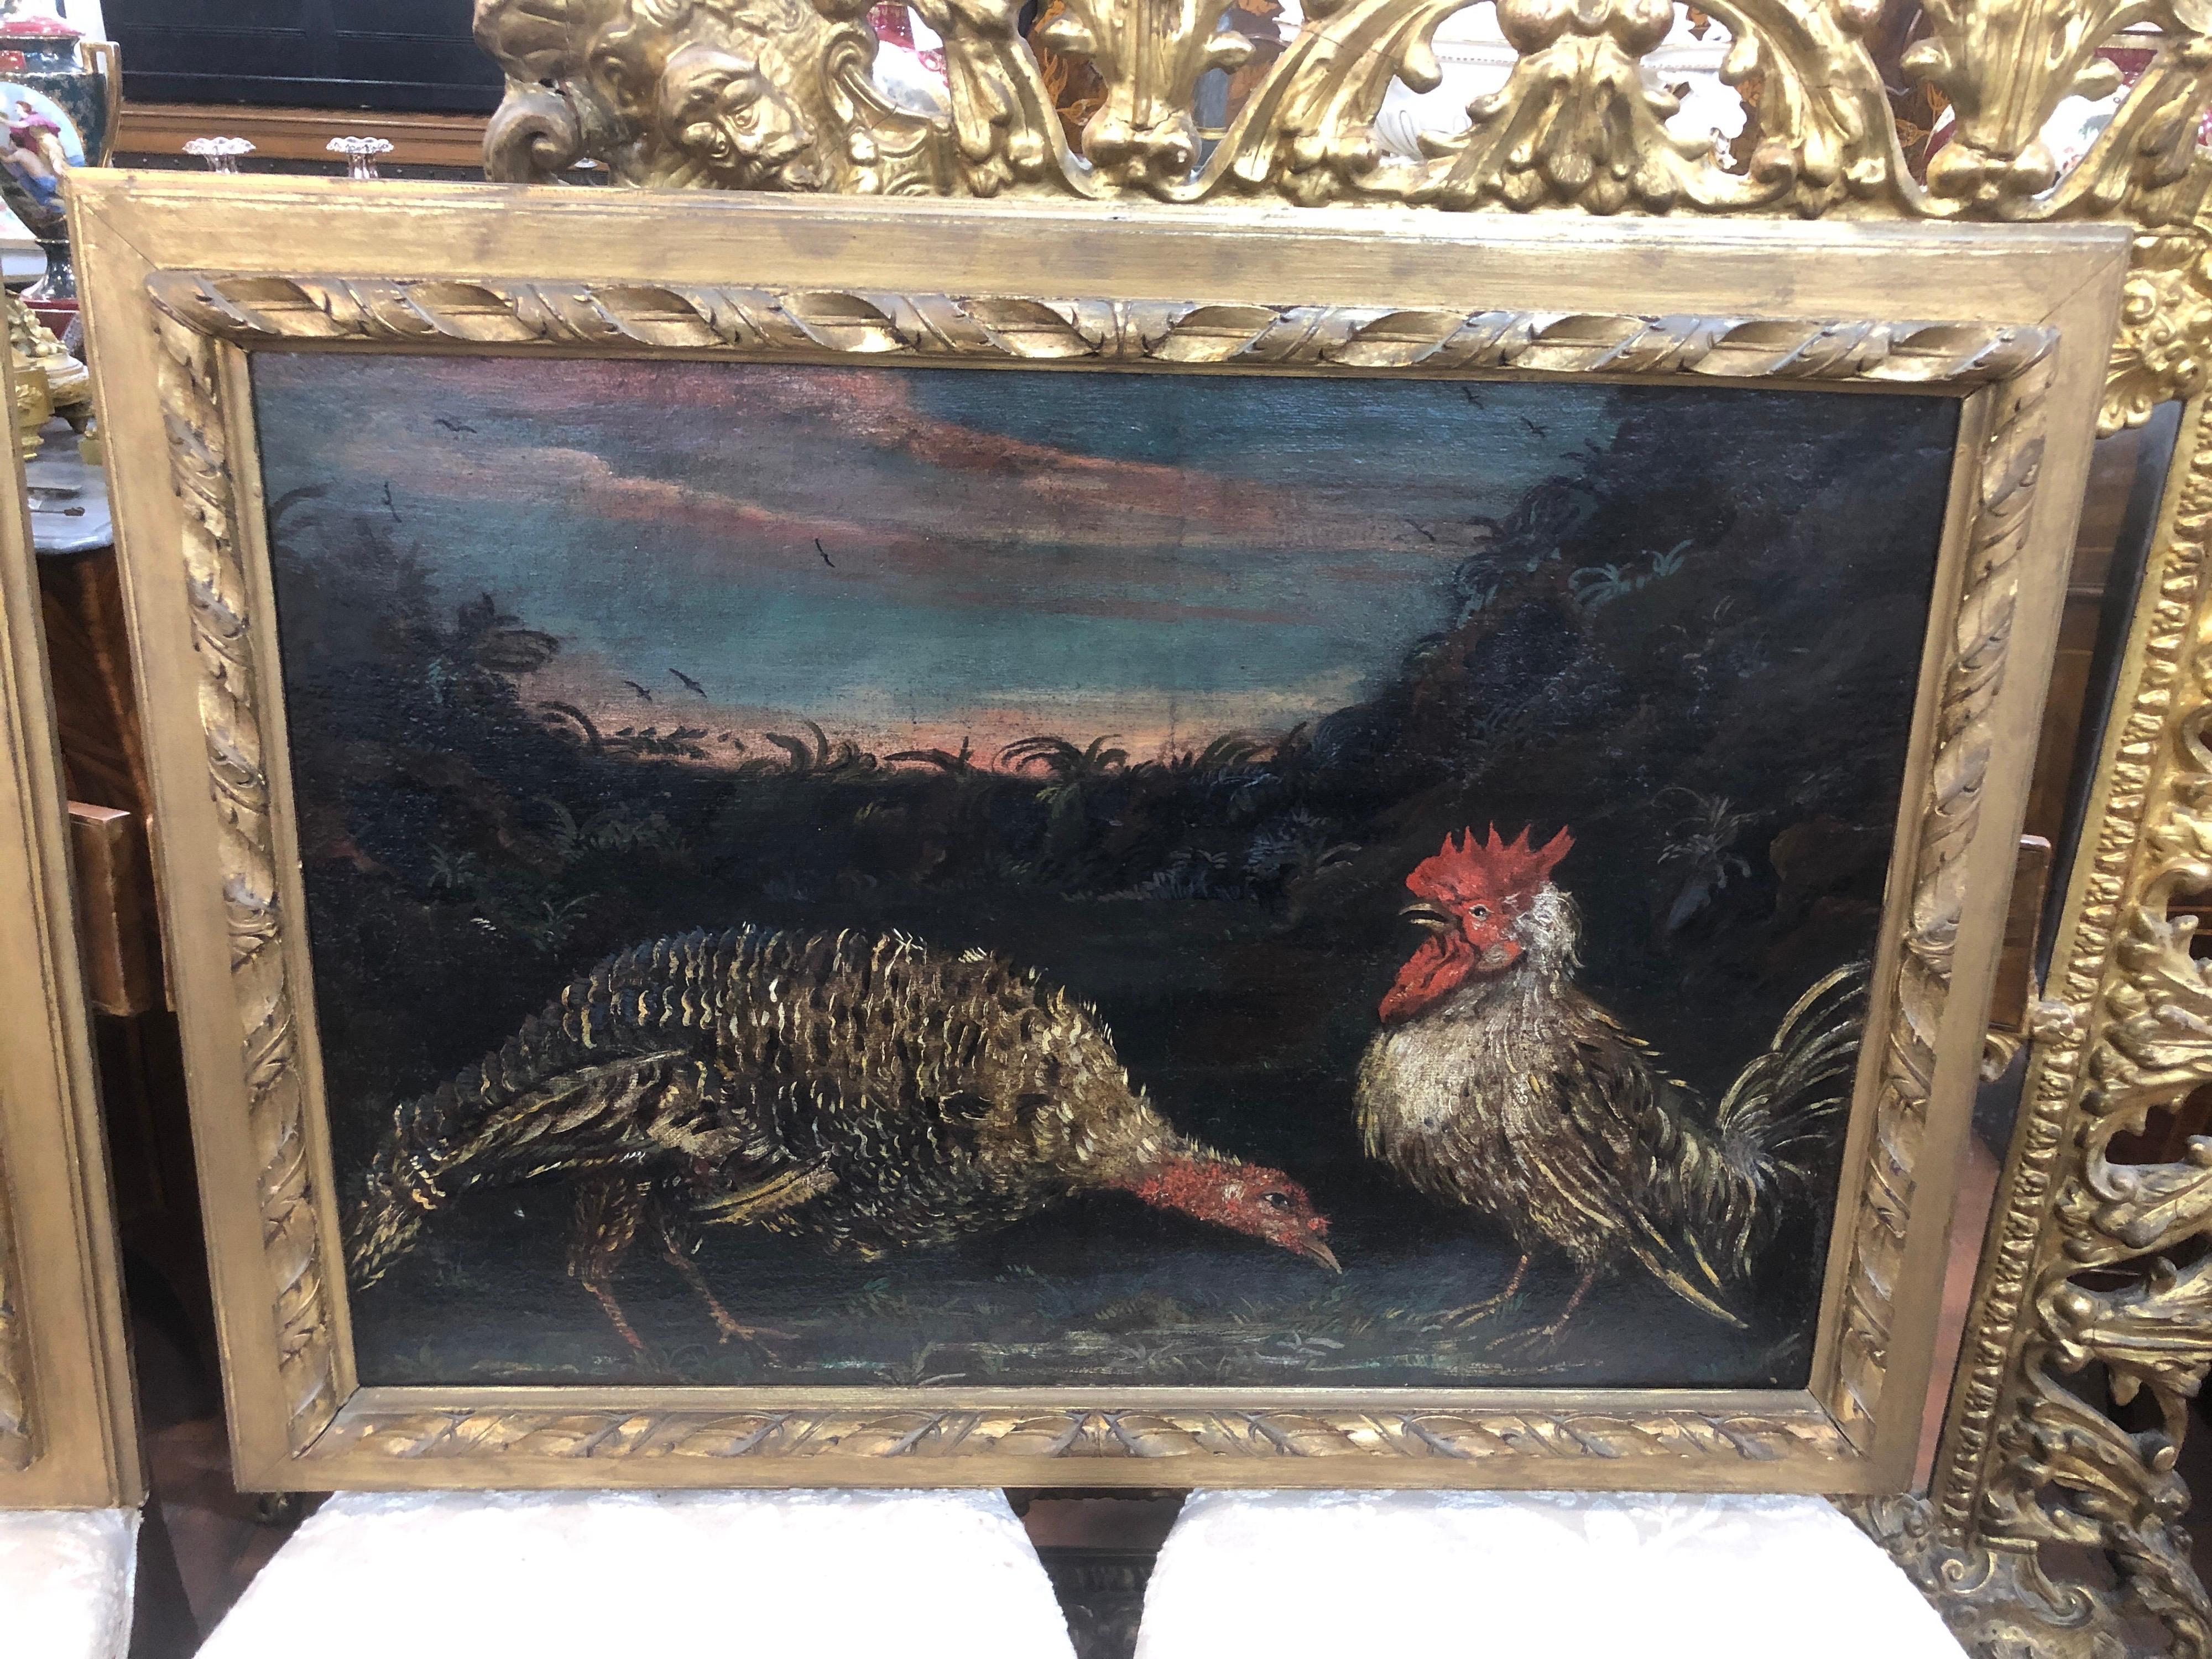 Pair of paintings, Lombard School 17th century, a turkey and a rooster, oil on canvas, in the manner of Angelo Maria Crivelli called the Crivellone. 81.5 x 57 without Frame. Frame no coeval.
Angelo Maria Crivelli, known as the Crivellone, was an